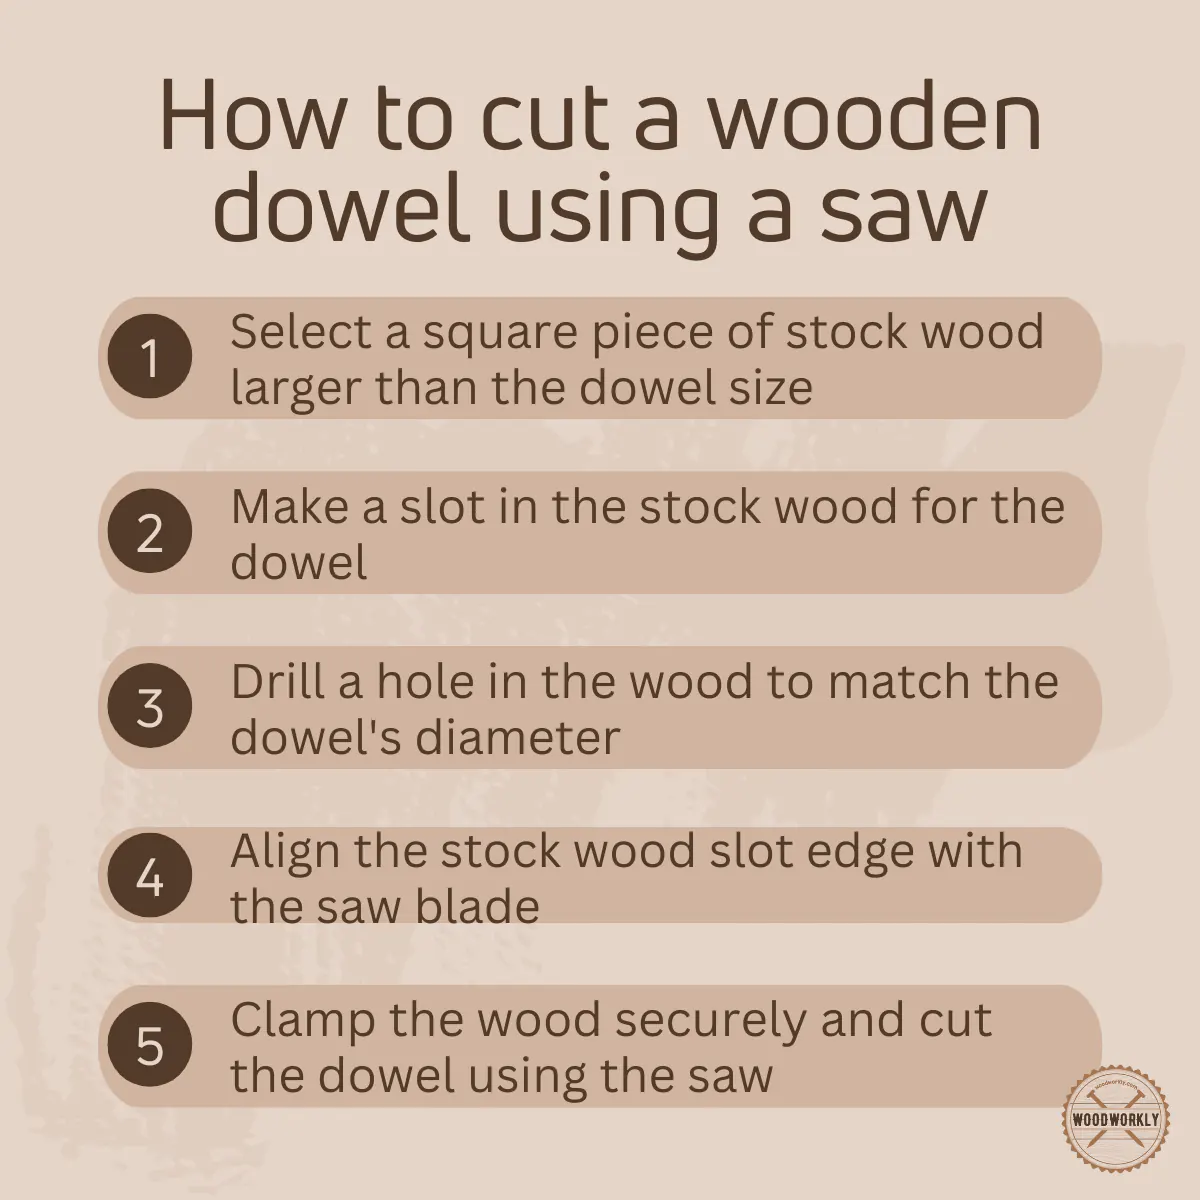 How to cut a wooden dowel using a saw